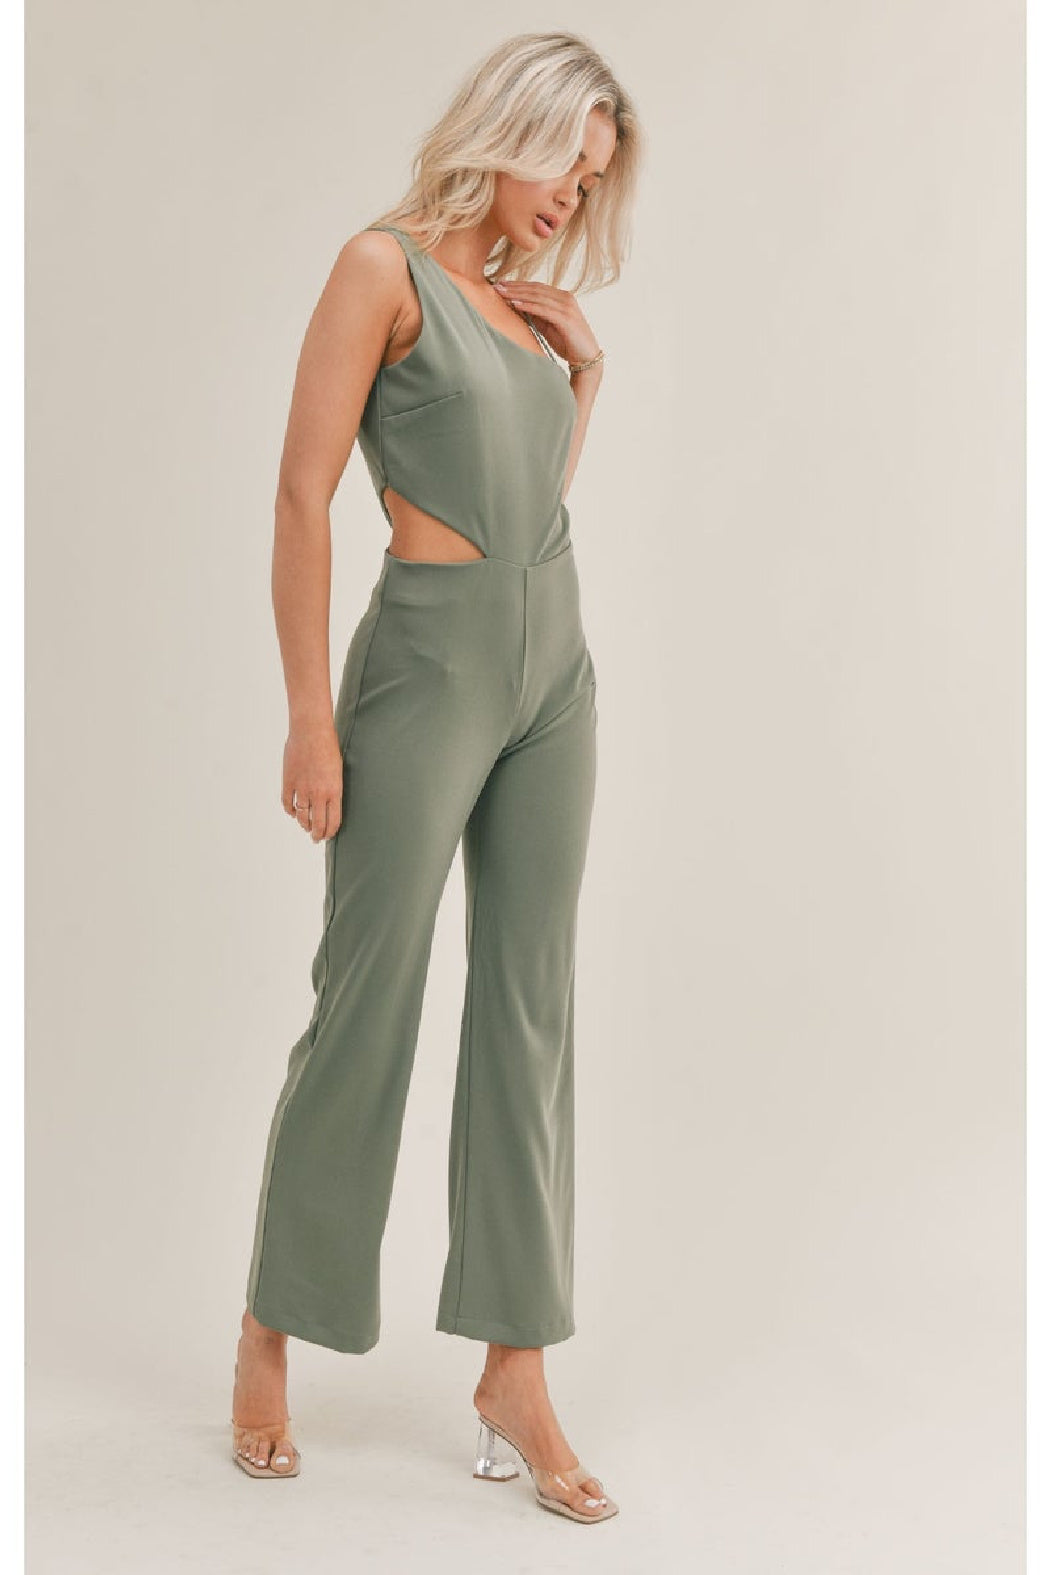 Cool Classic Jumpsuit - Olive | STL - Clearance